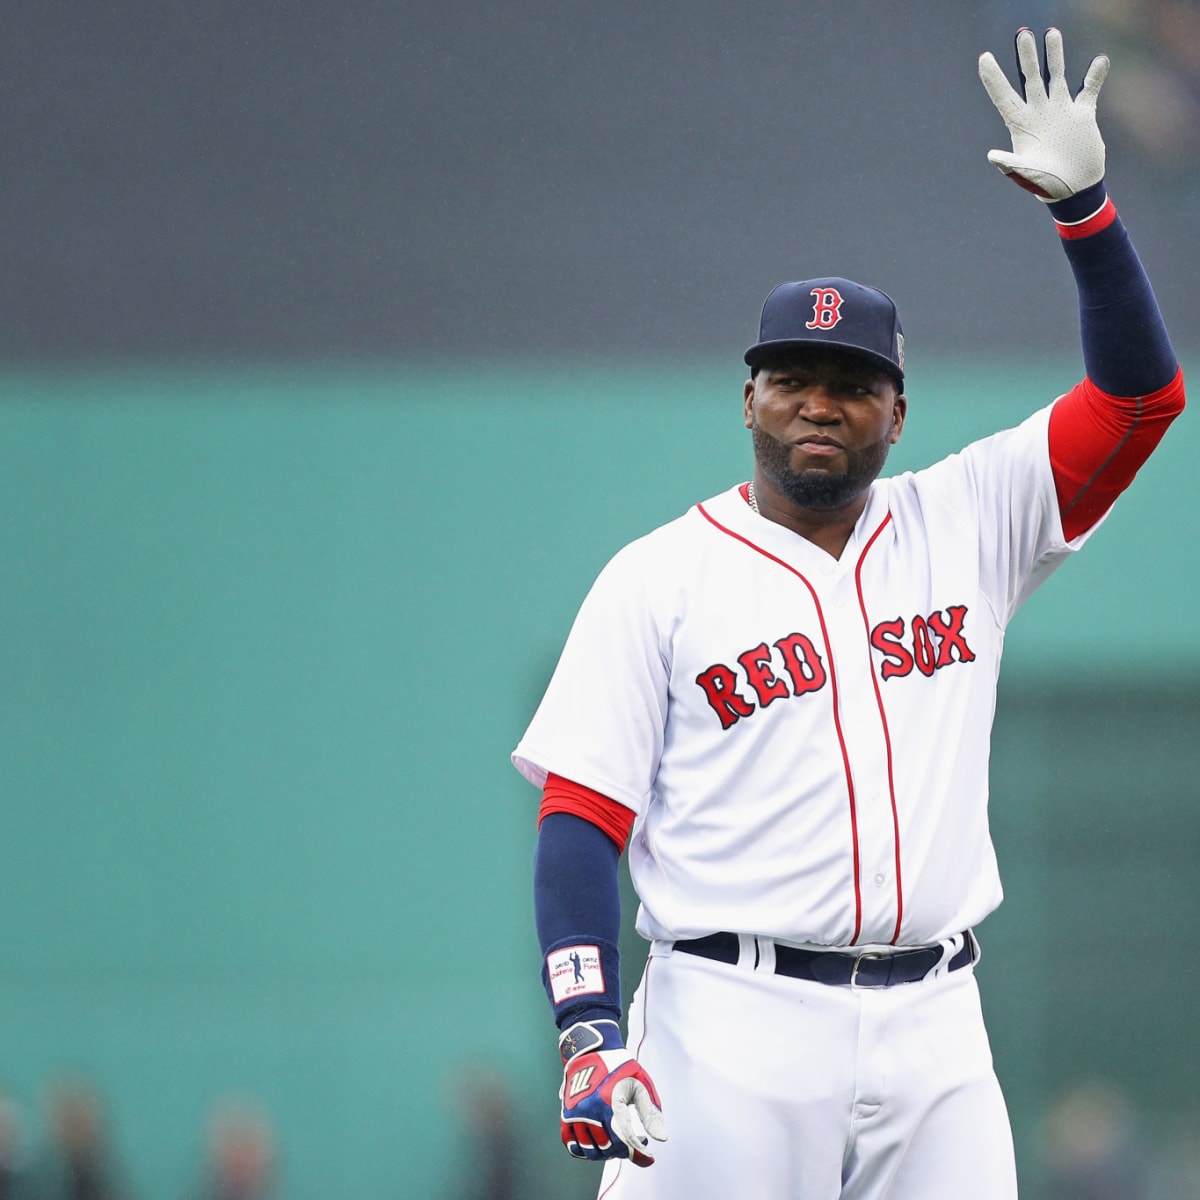 David Ortiz improving, moved out of intensive care, his wife says